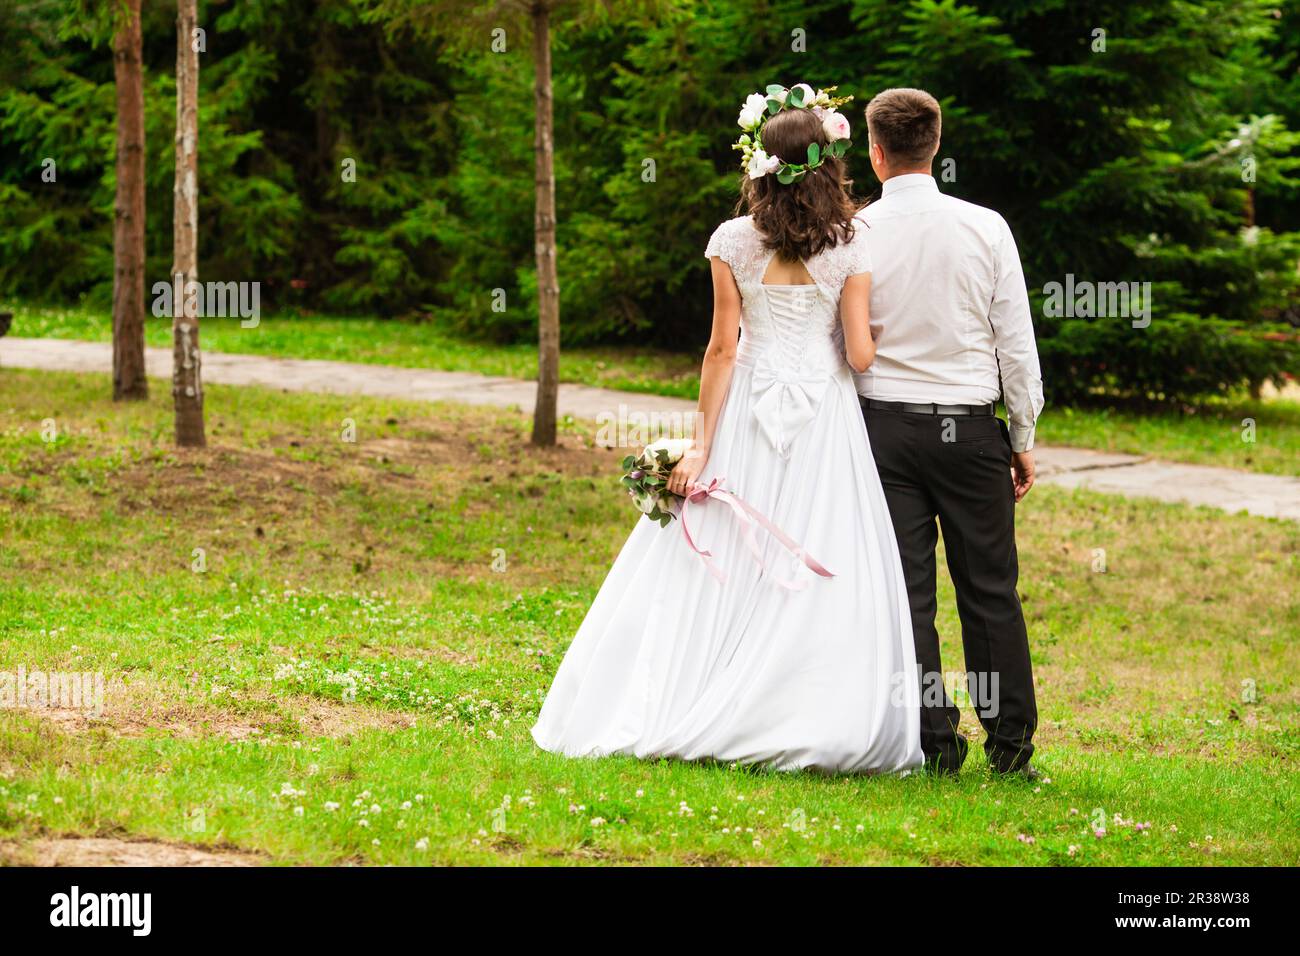 The bride gets married outdoors in the park Stock Photo